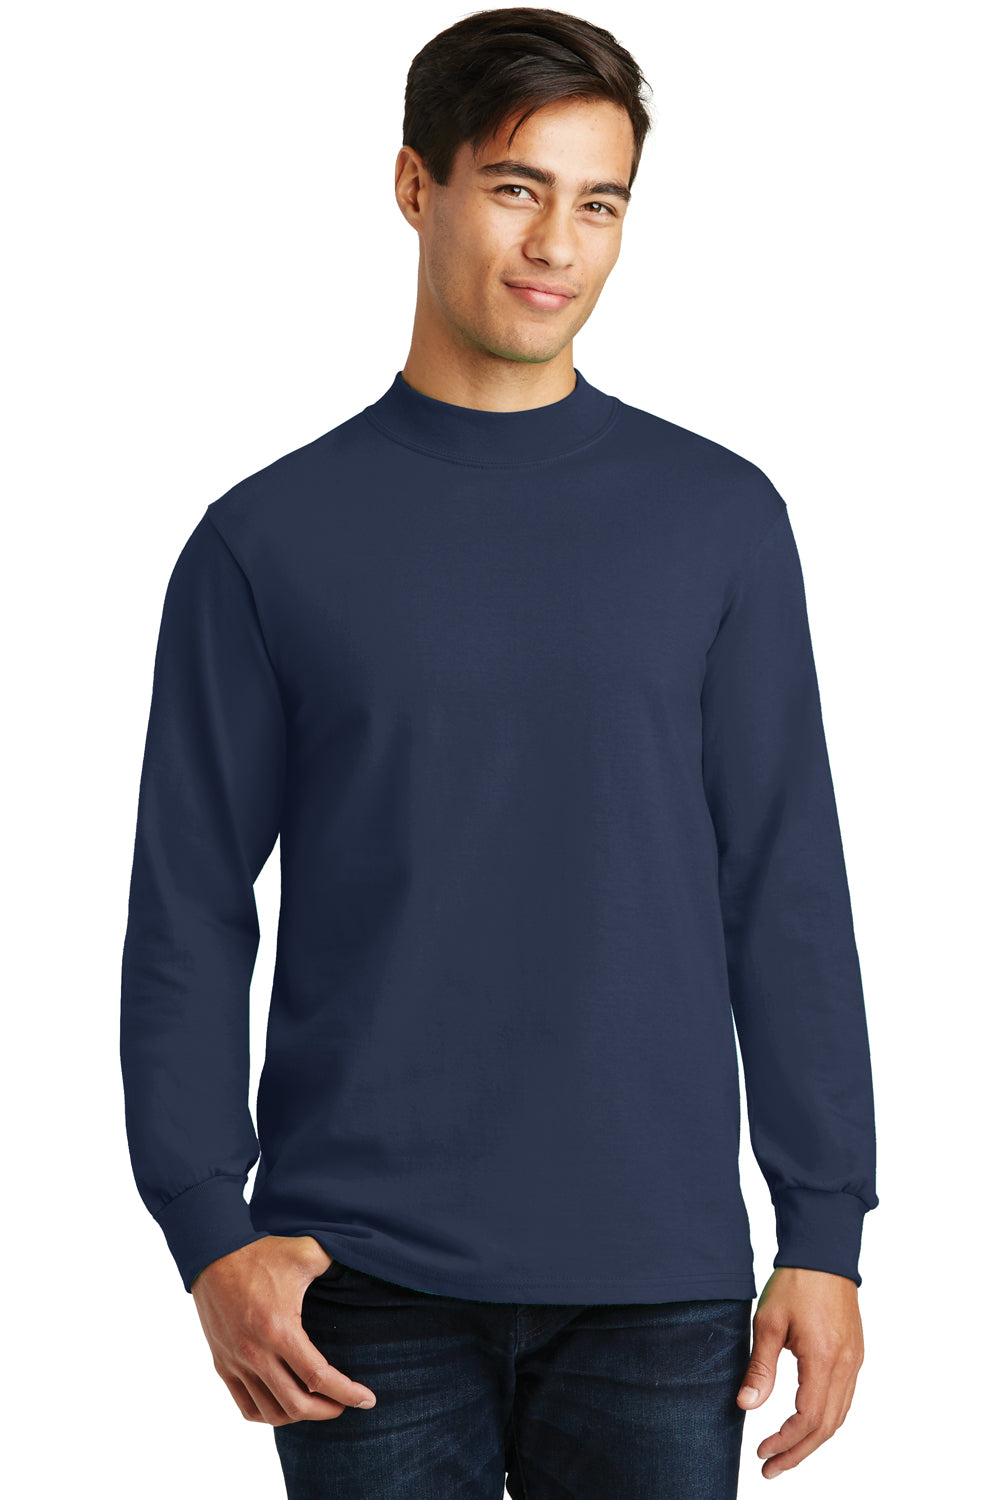 Port & Company PC61M Mens Essential Long Sleeve Mock Neck T-Shirt Navy Blue Front